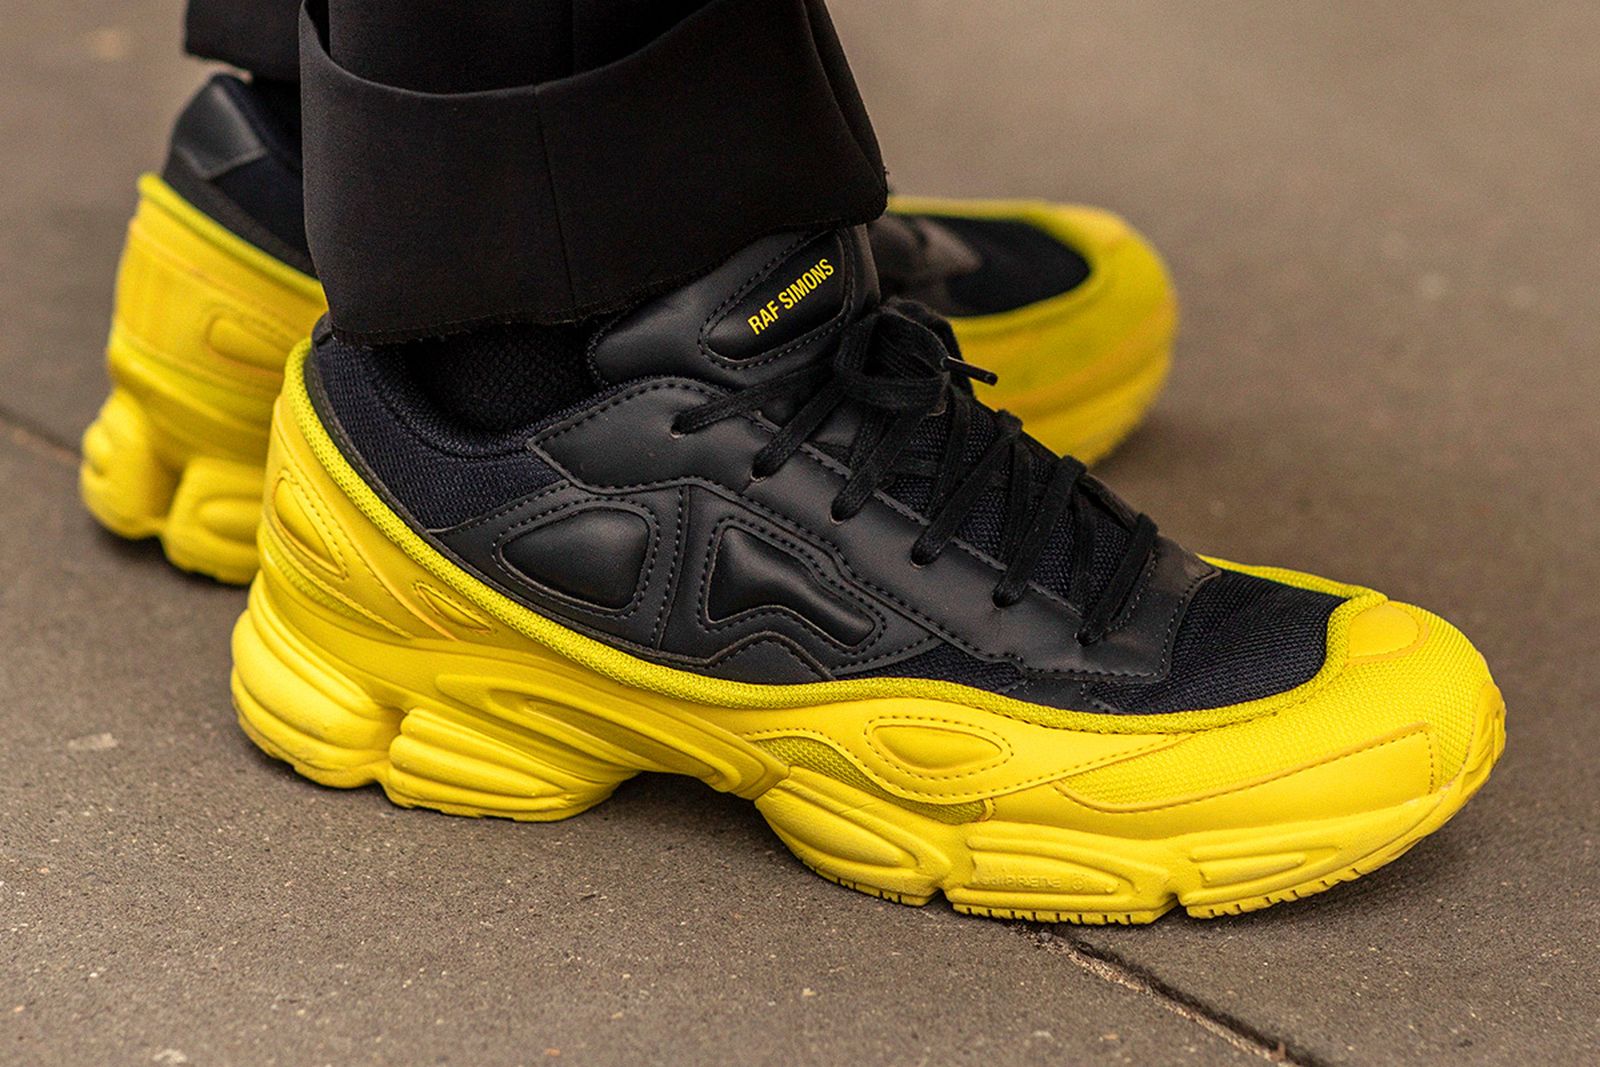 Trillen Bedienen serie Raf Simons' Ozweego is Great, But It's Time for Something New